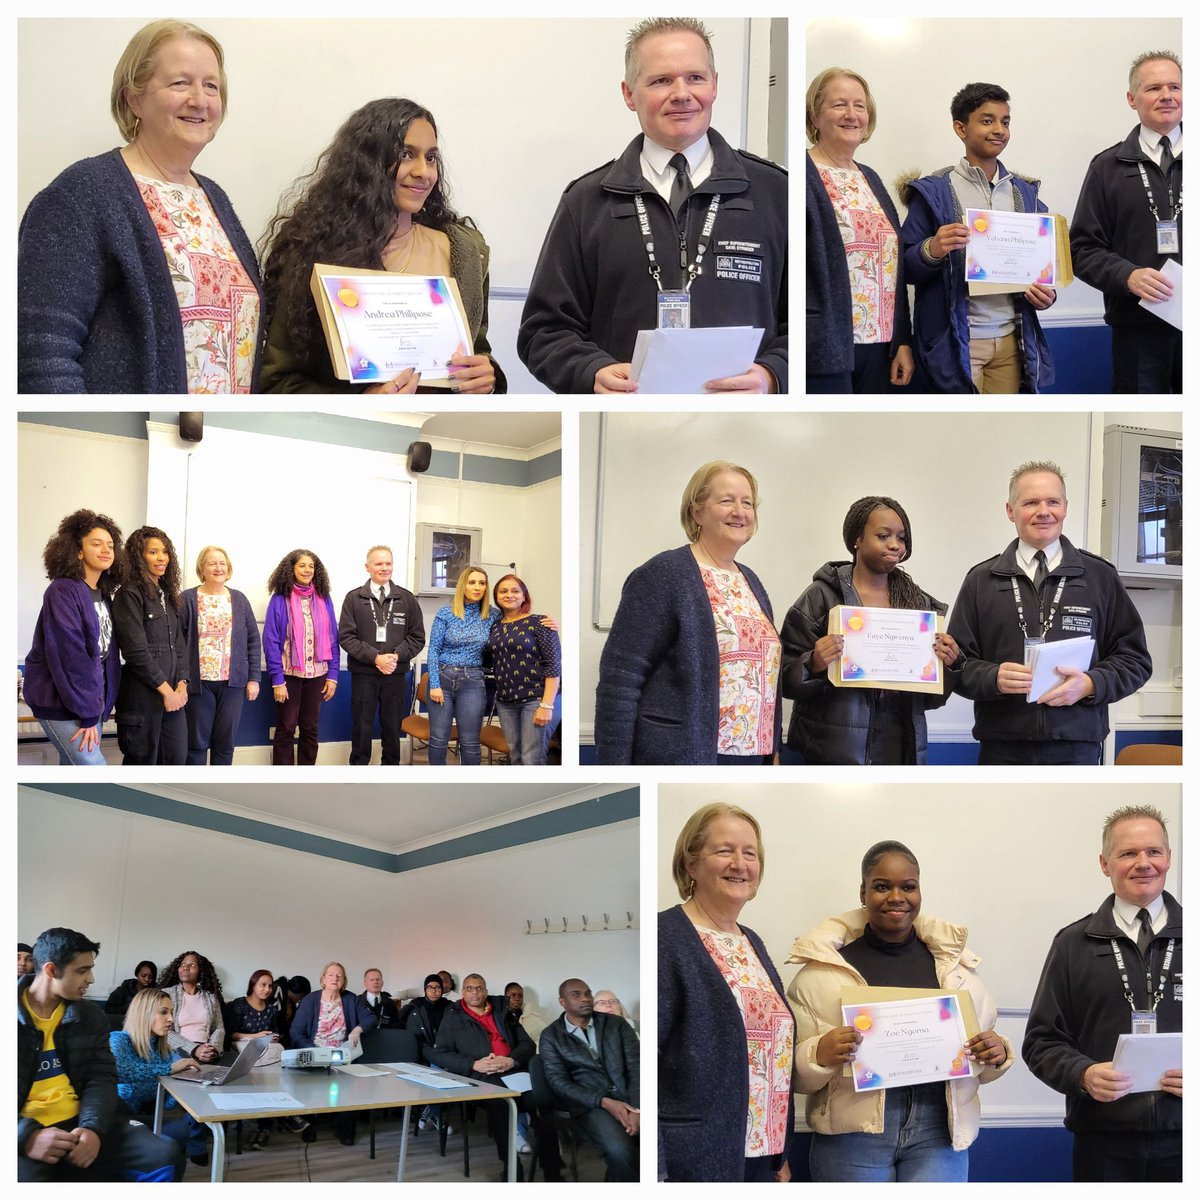 Great evening! So proud of our Sutton young people who took part in this amazing project. A big thank you to @RaziaSattar3 for facilitating & team @ComActionSutton, Jubee at ASCC. Also, a massive thank you @LeaderSutton, the BCU commander @mpsdavestringer,and Sgt Diane Vincent.